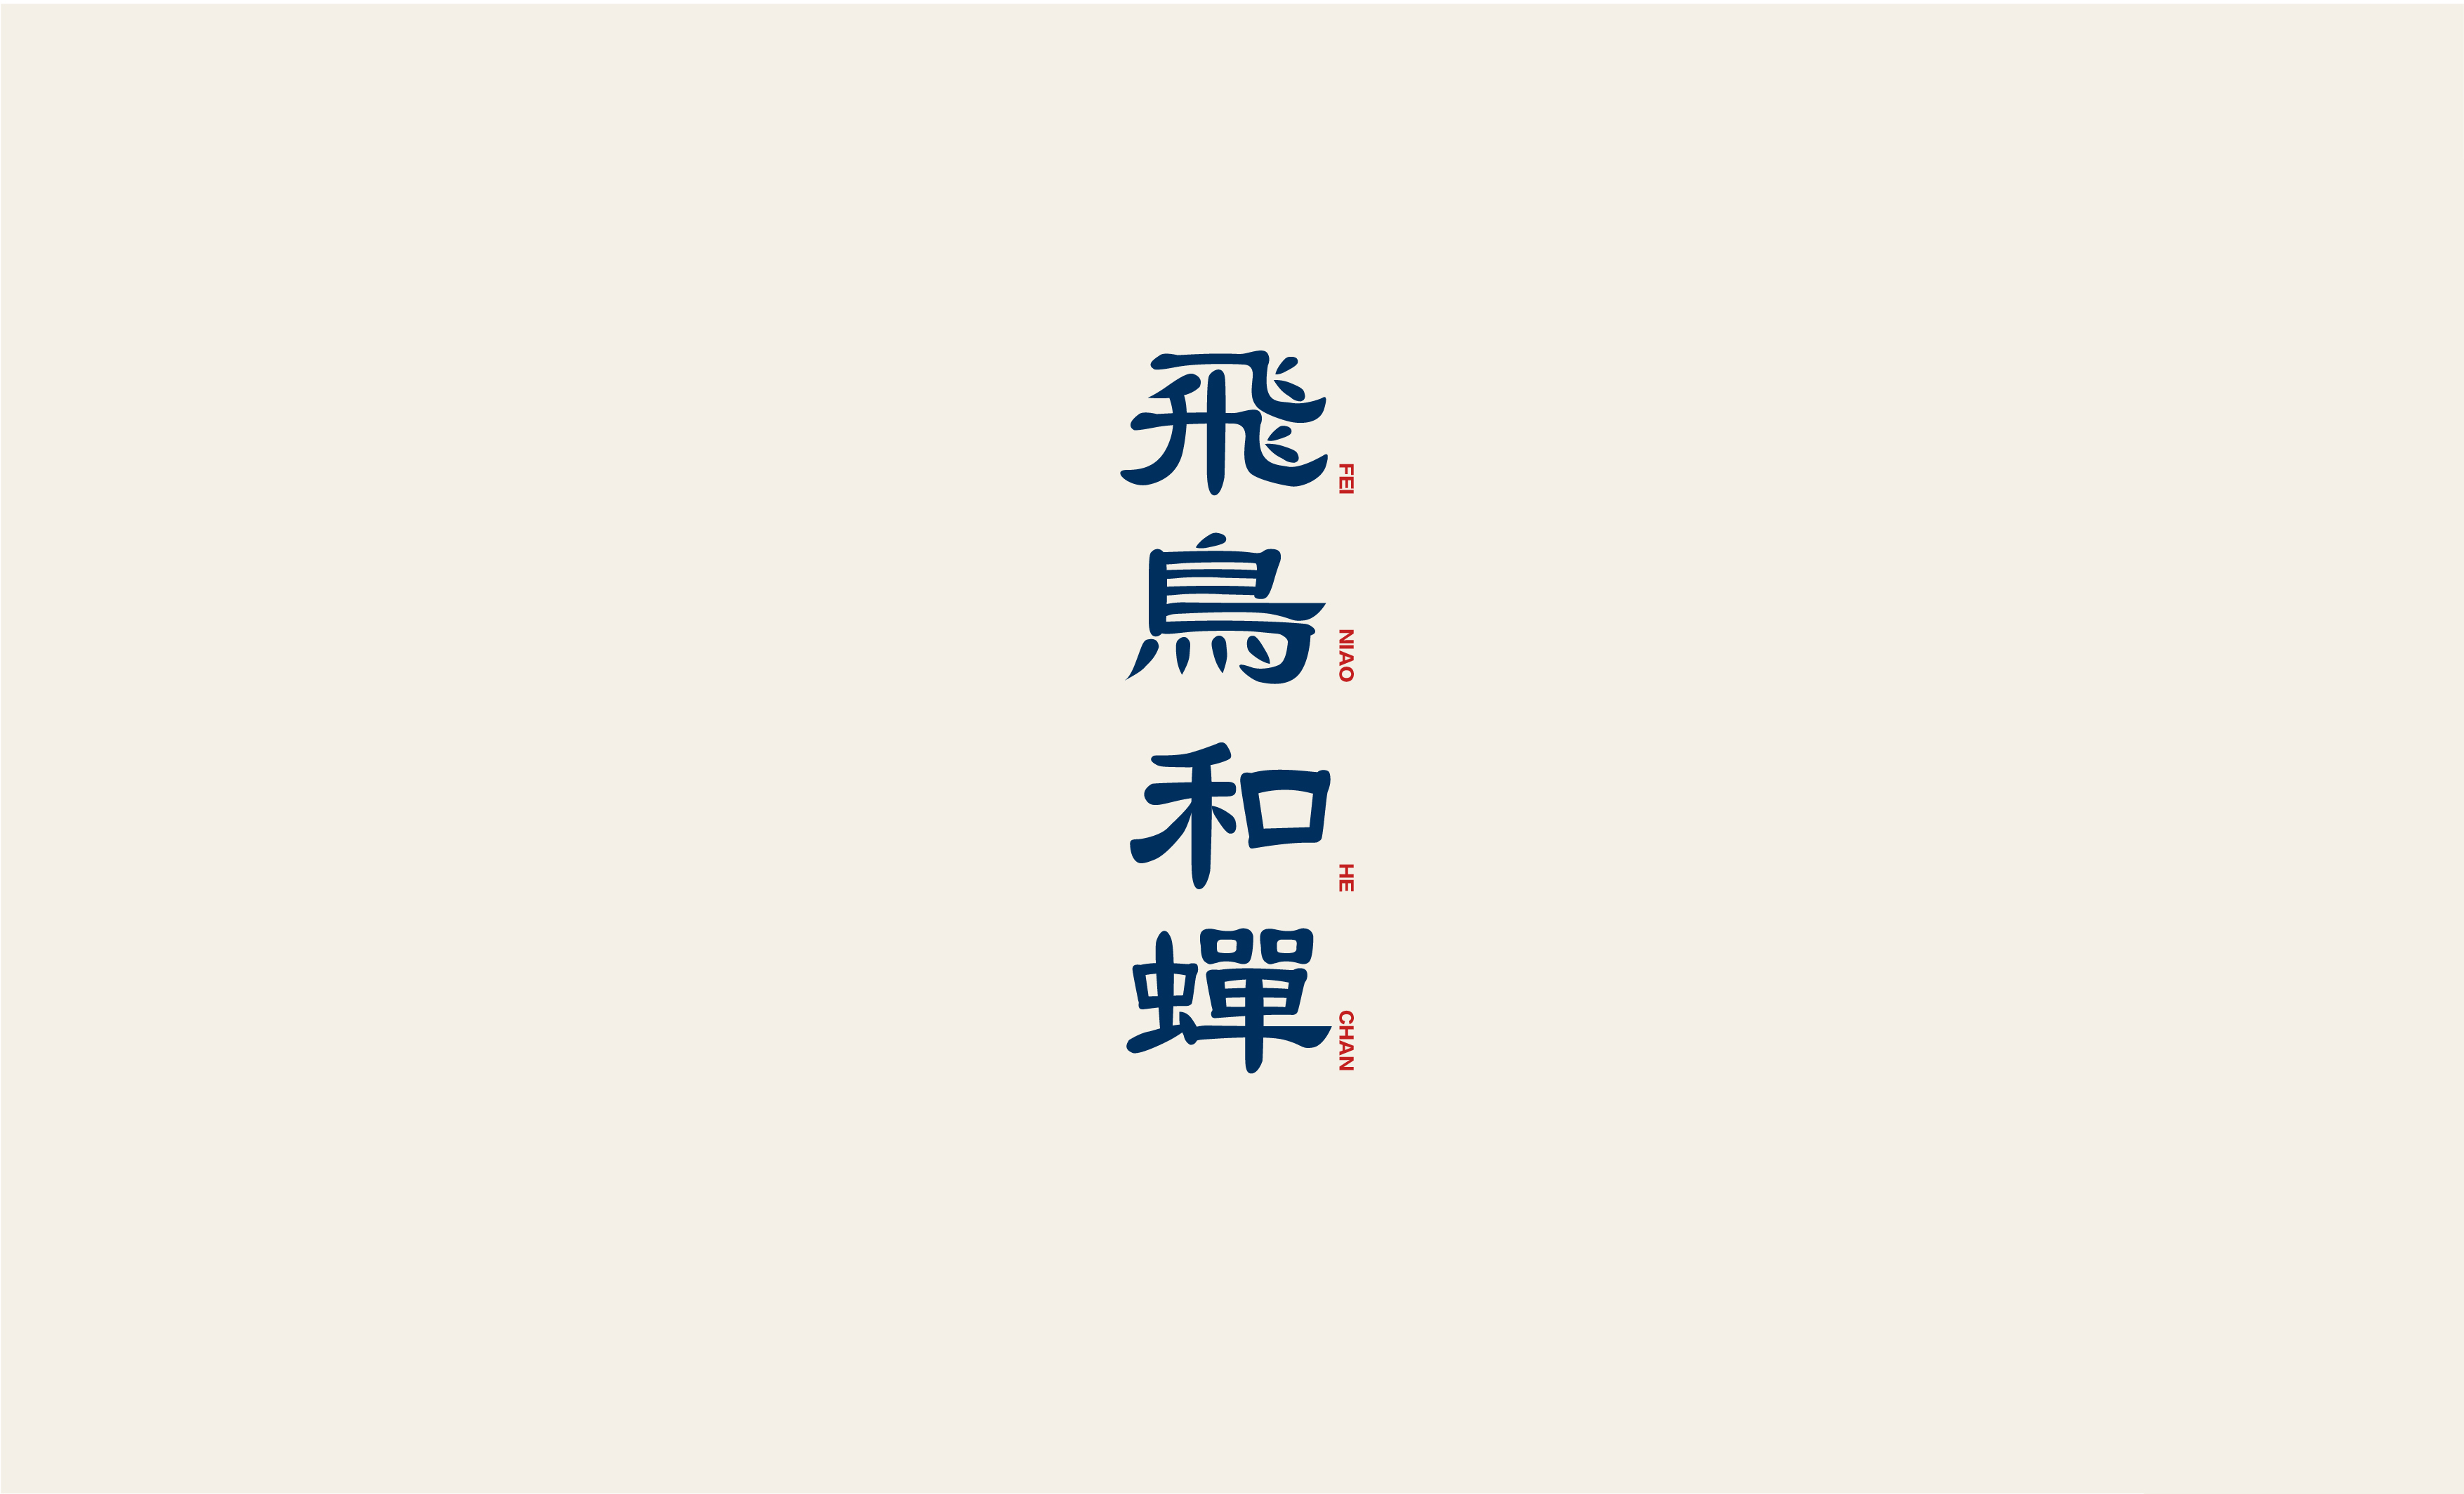 18P Collection of the latest Chinese font design schemes in 2021 #.317